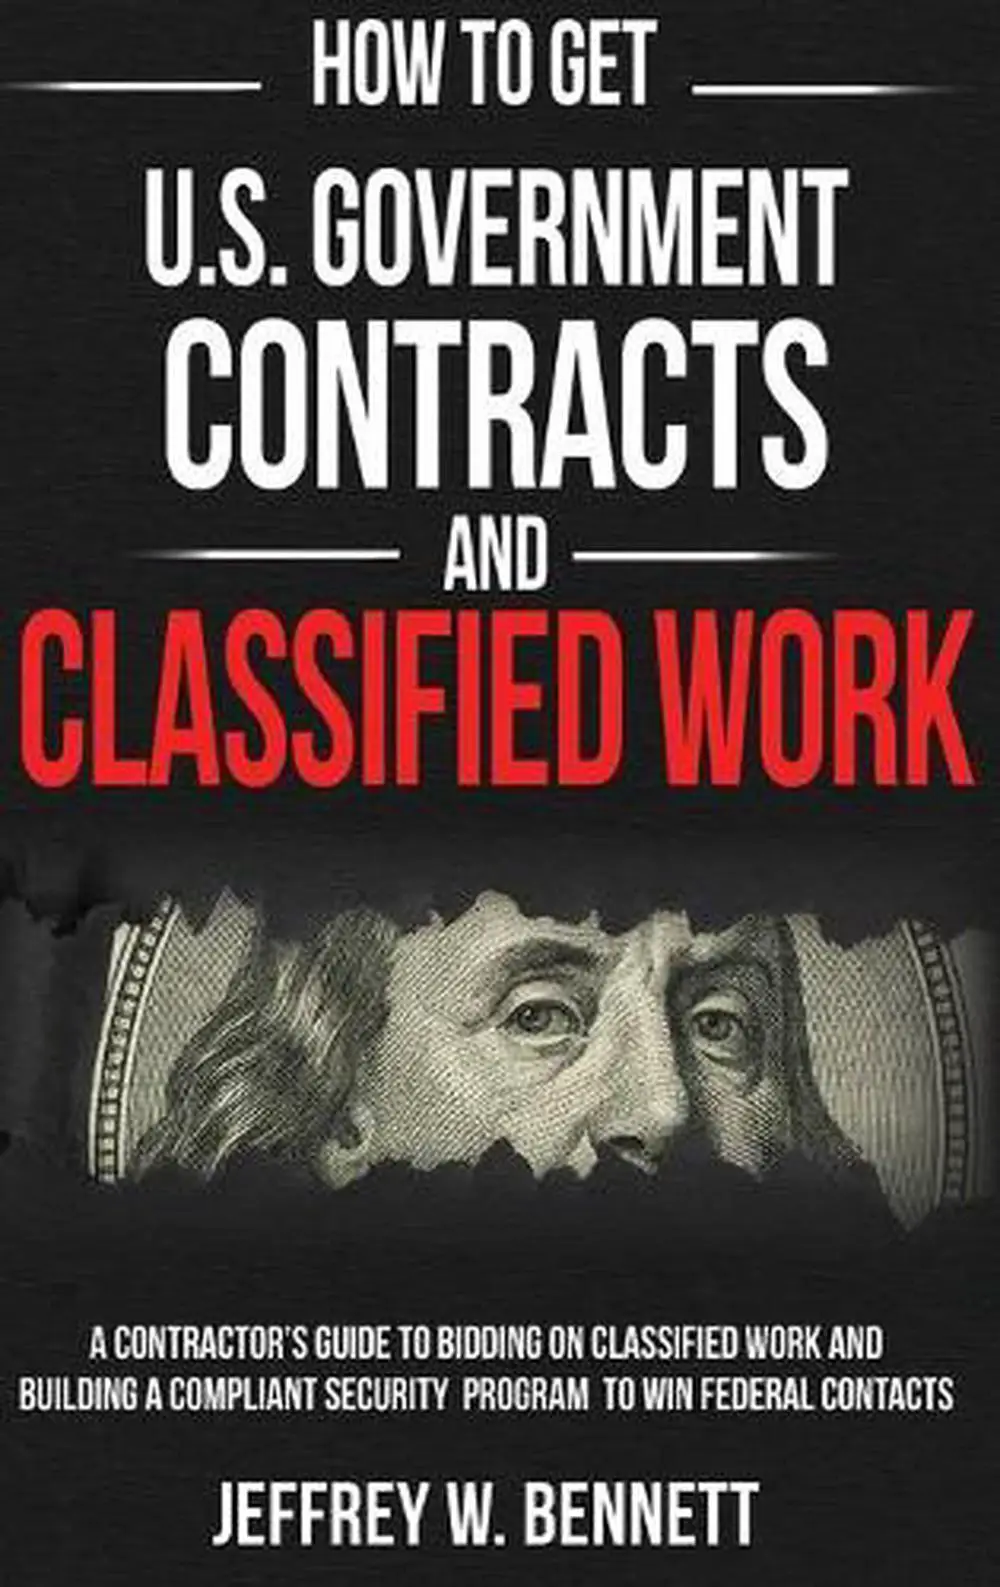 How to Get U.S. Government Contracts and Classified Work ...